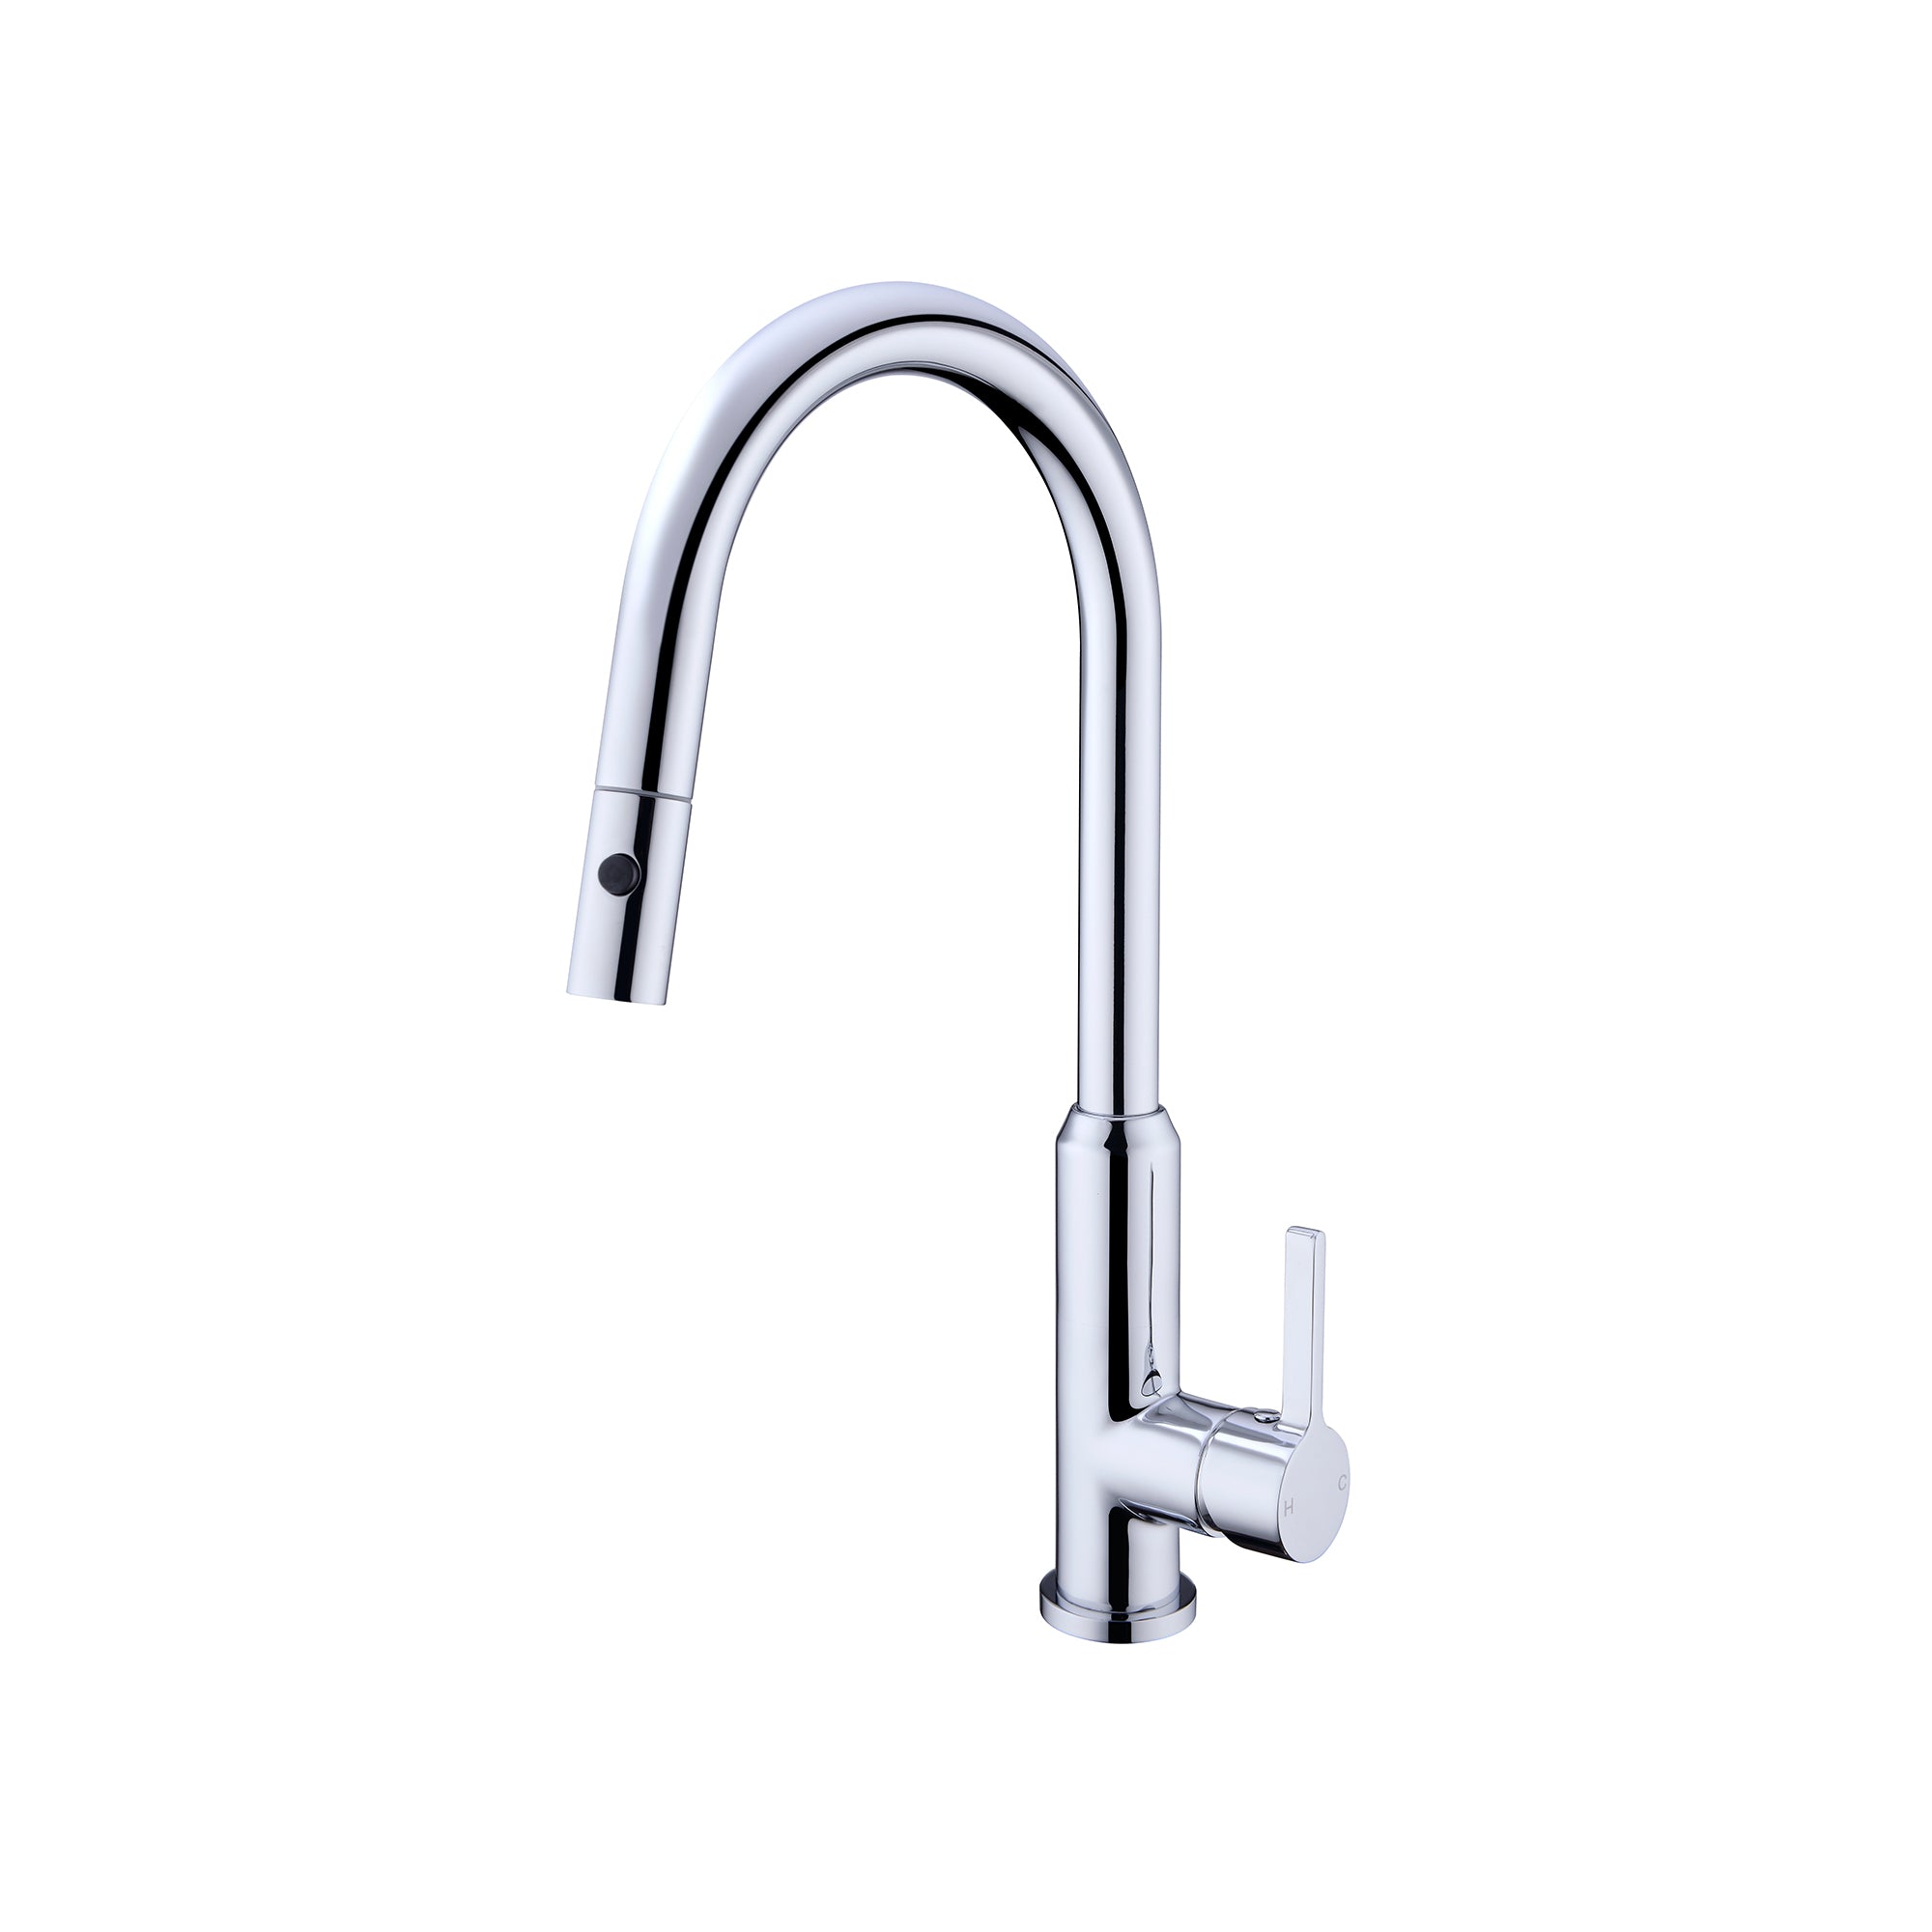 NERO PEARL SPRAY PULL OUT SINK MIXER 452MM CHROME